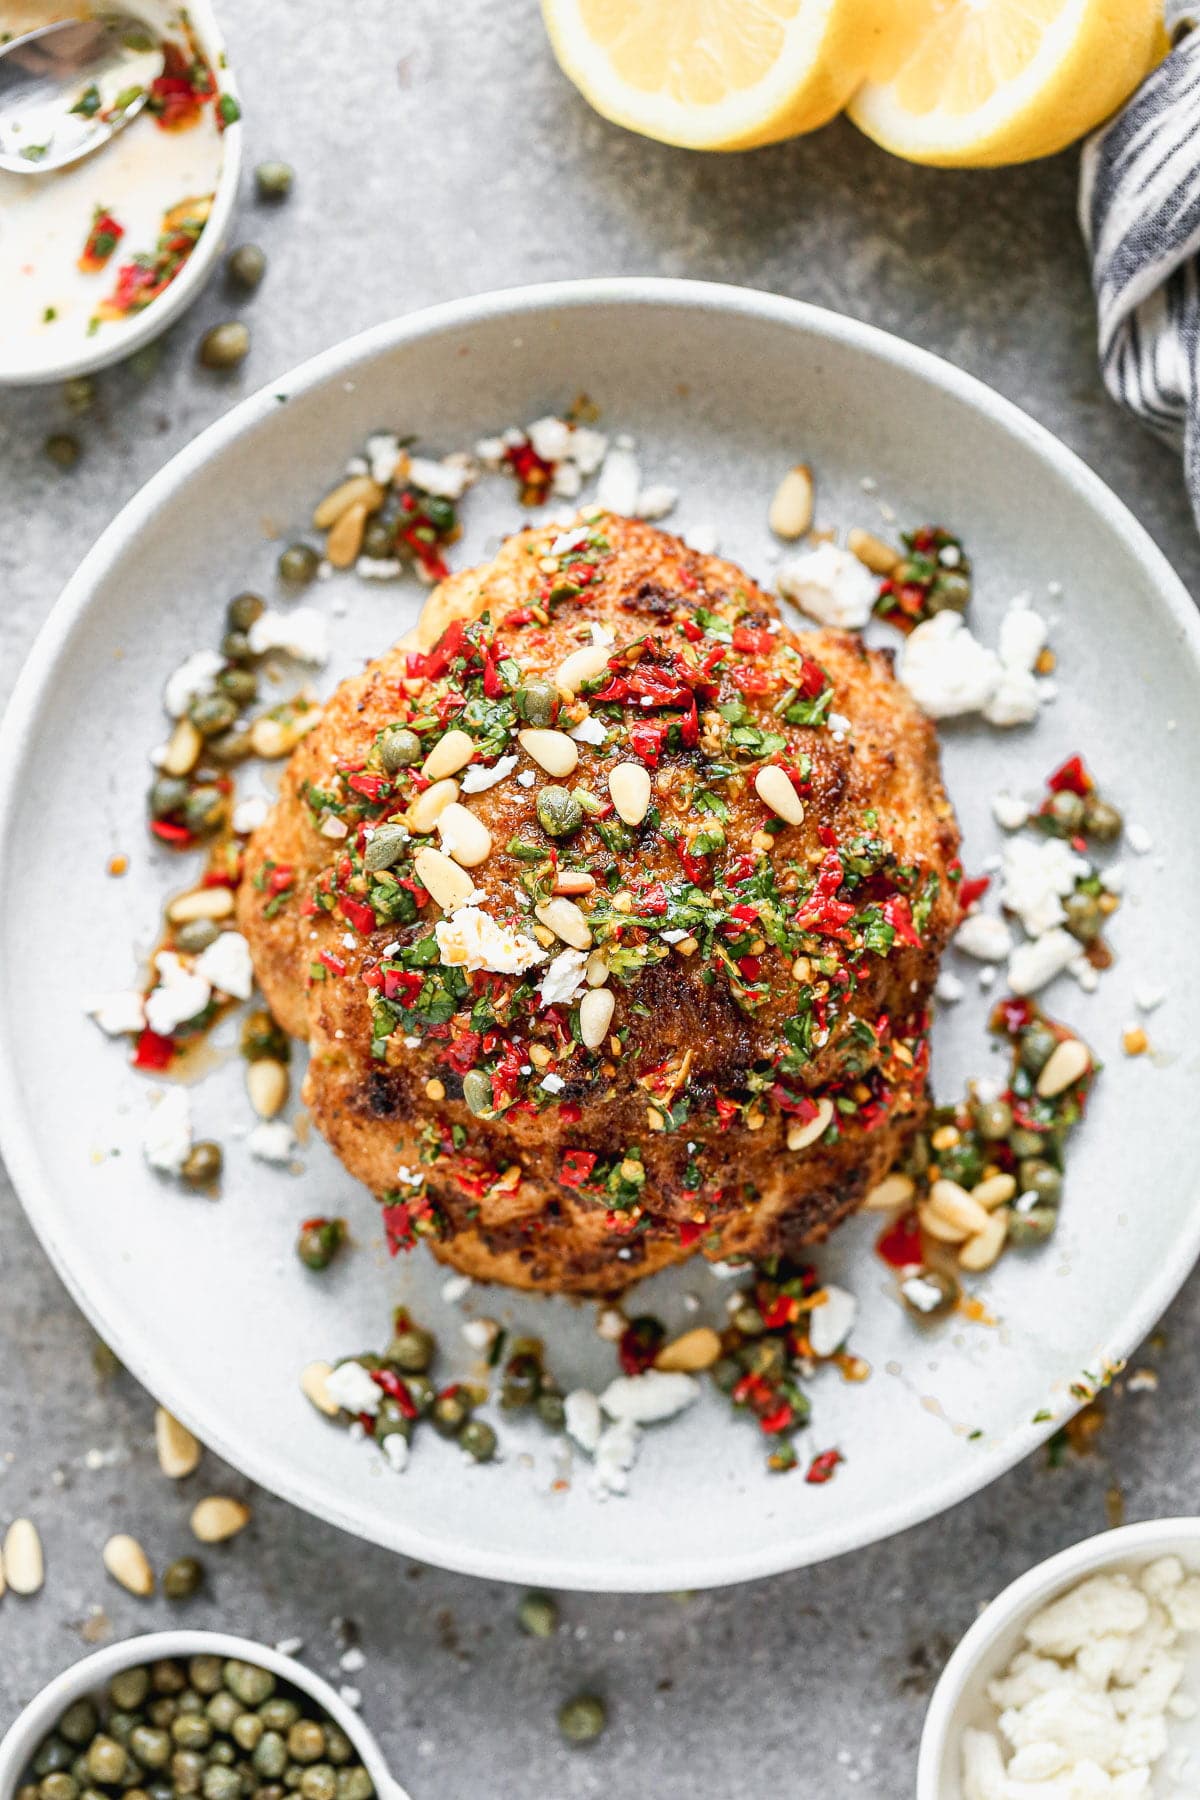 Visually beautiful and even tastier to eat, our Whole Roasted Cauliflower is THE vegetable recipe worthy of a permanent place in your dinner rotation. We steam a whole head of cauliflower, rub with with spices and then roast until it's tender on the inside and ultra crispy on top.  We cover it in an easy Calabrian Chili Chimichurri, sprinkle with toasted pine nuts, and finish it off with salty feta cheese. Eat a whole one for a meal or share with others as a side dish.